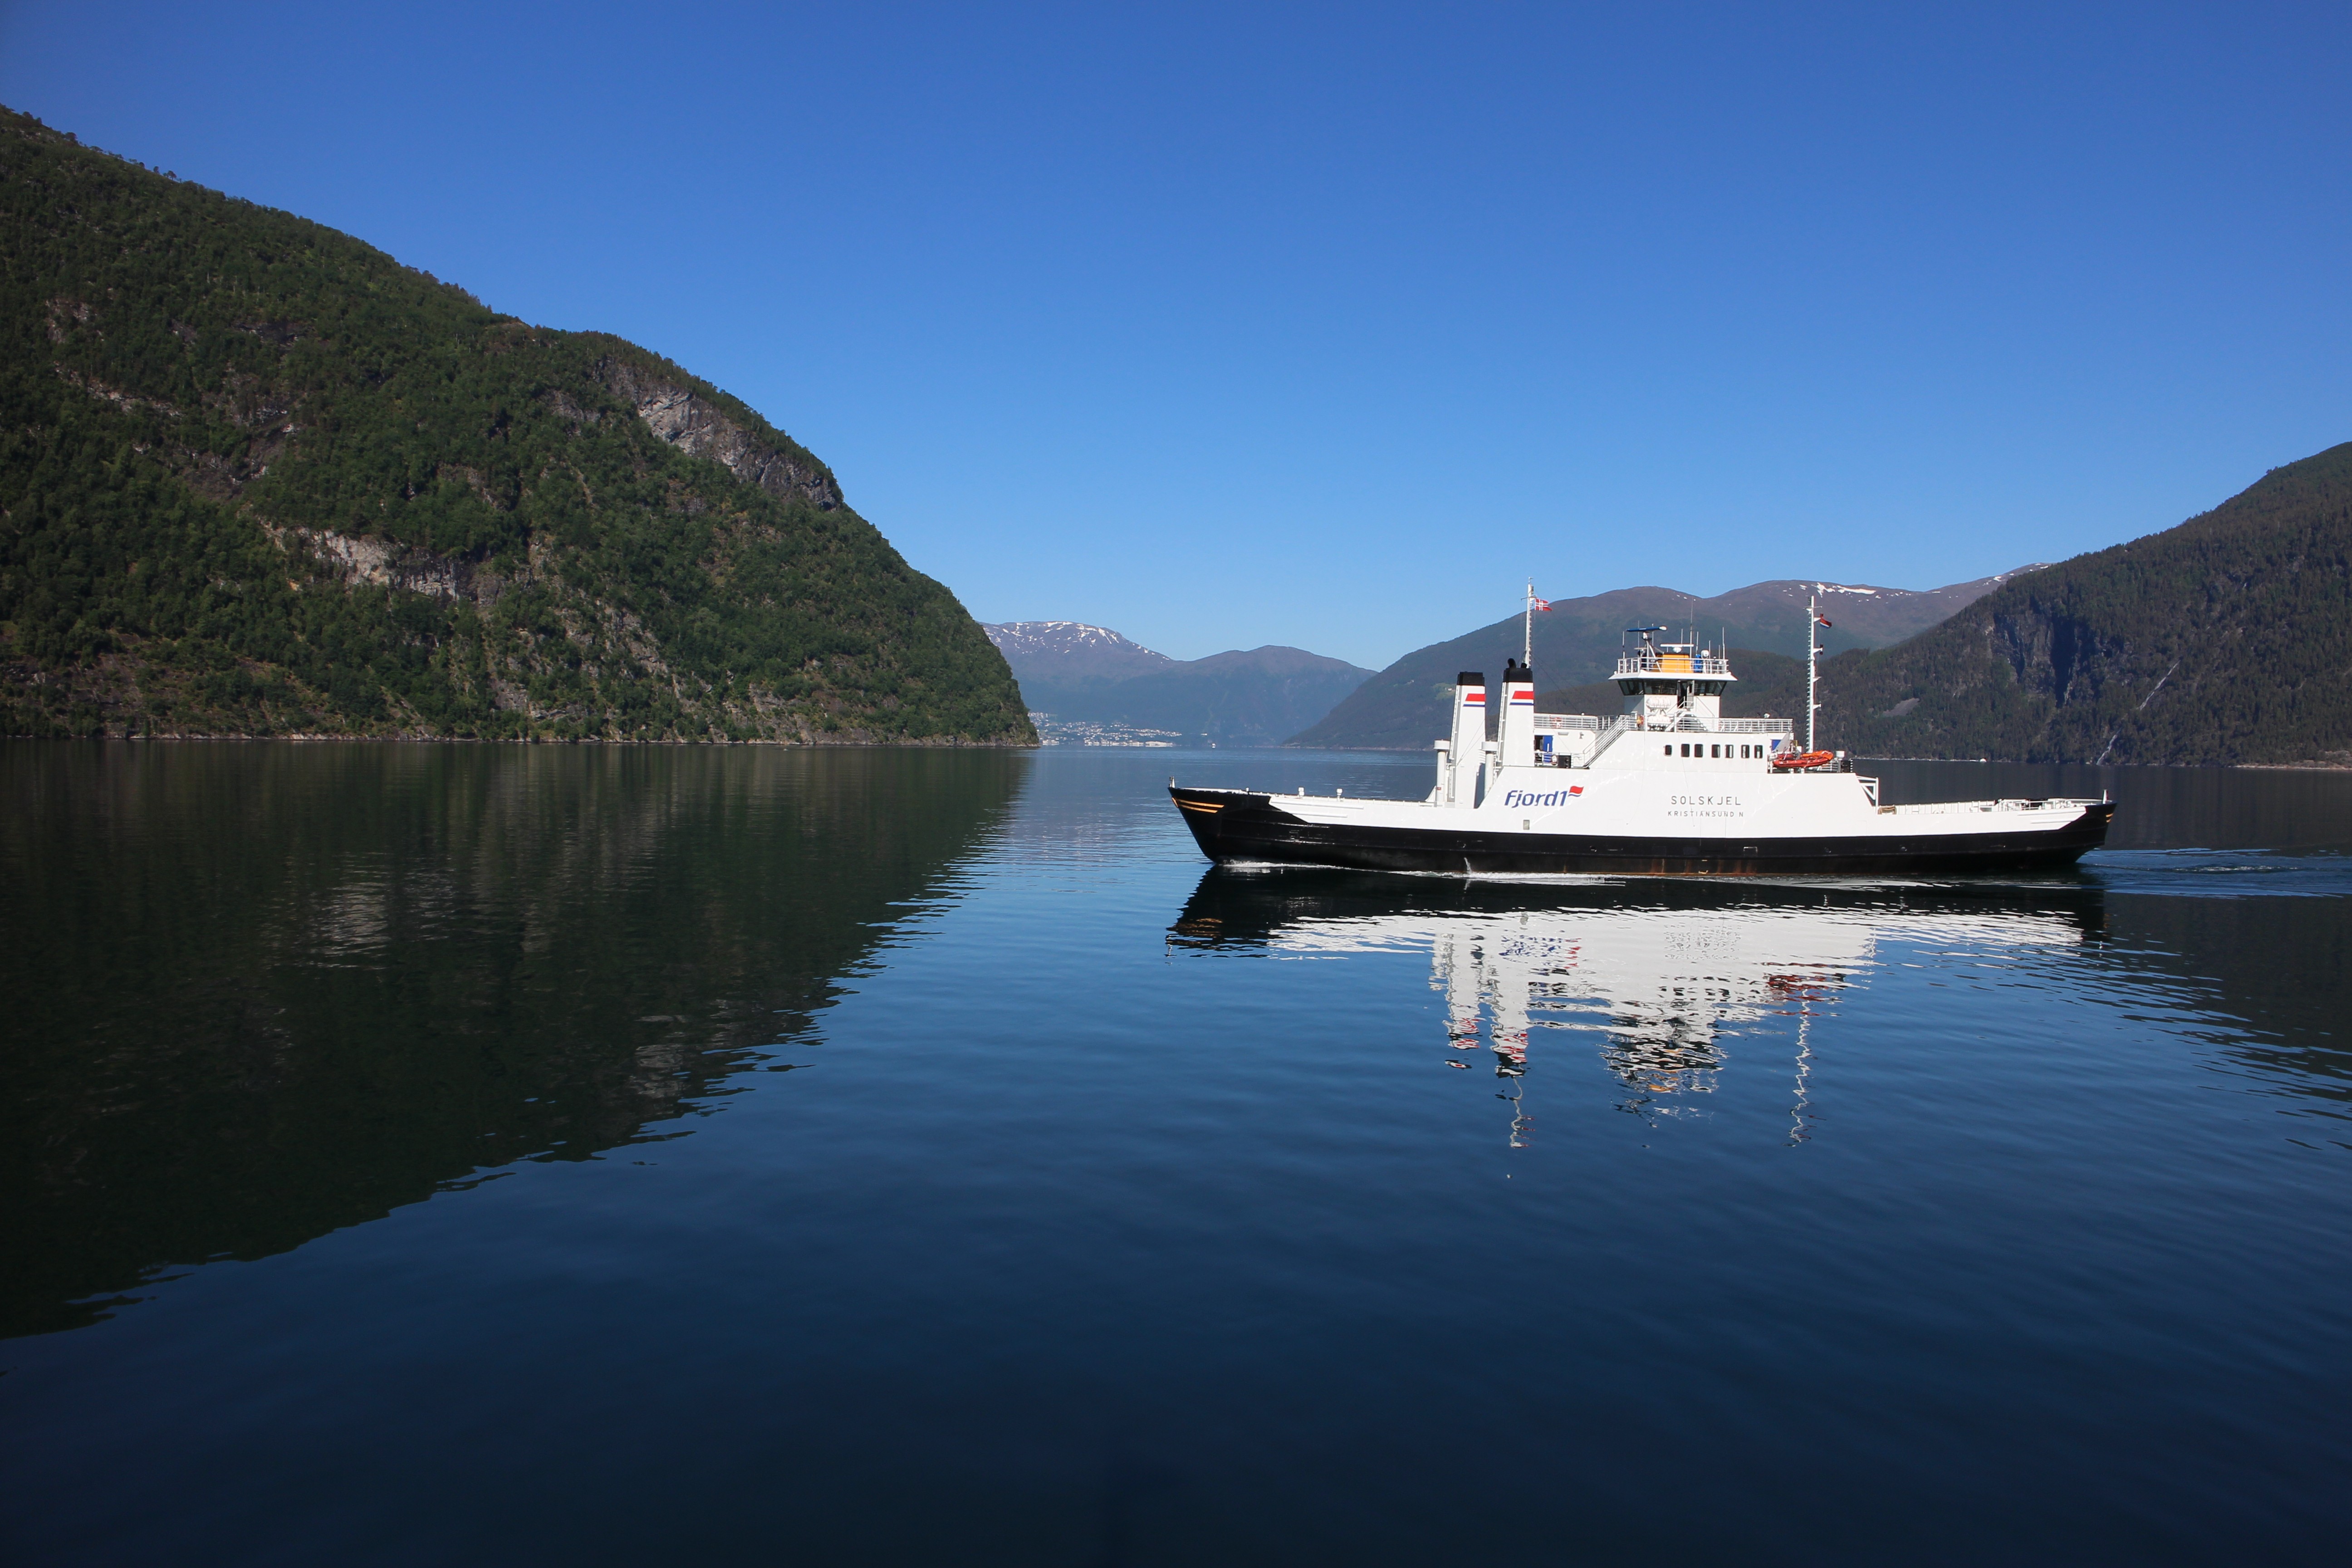 General 5184x3456 Stranda fjord Norway nature landscape mountains ferry vehicle boat